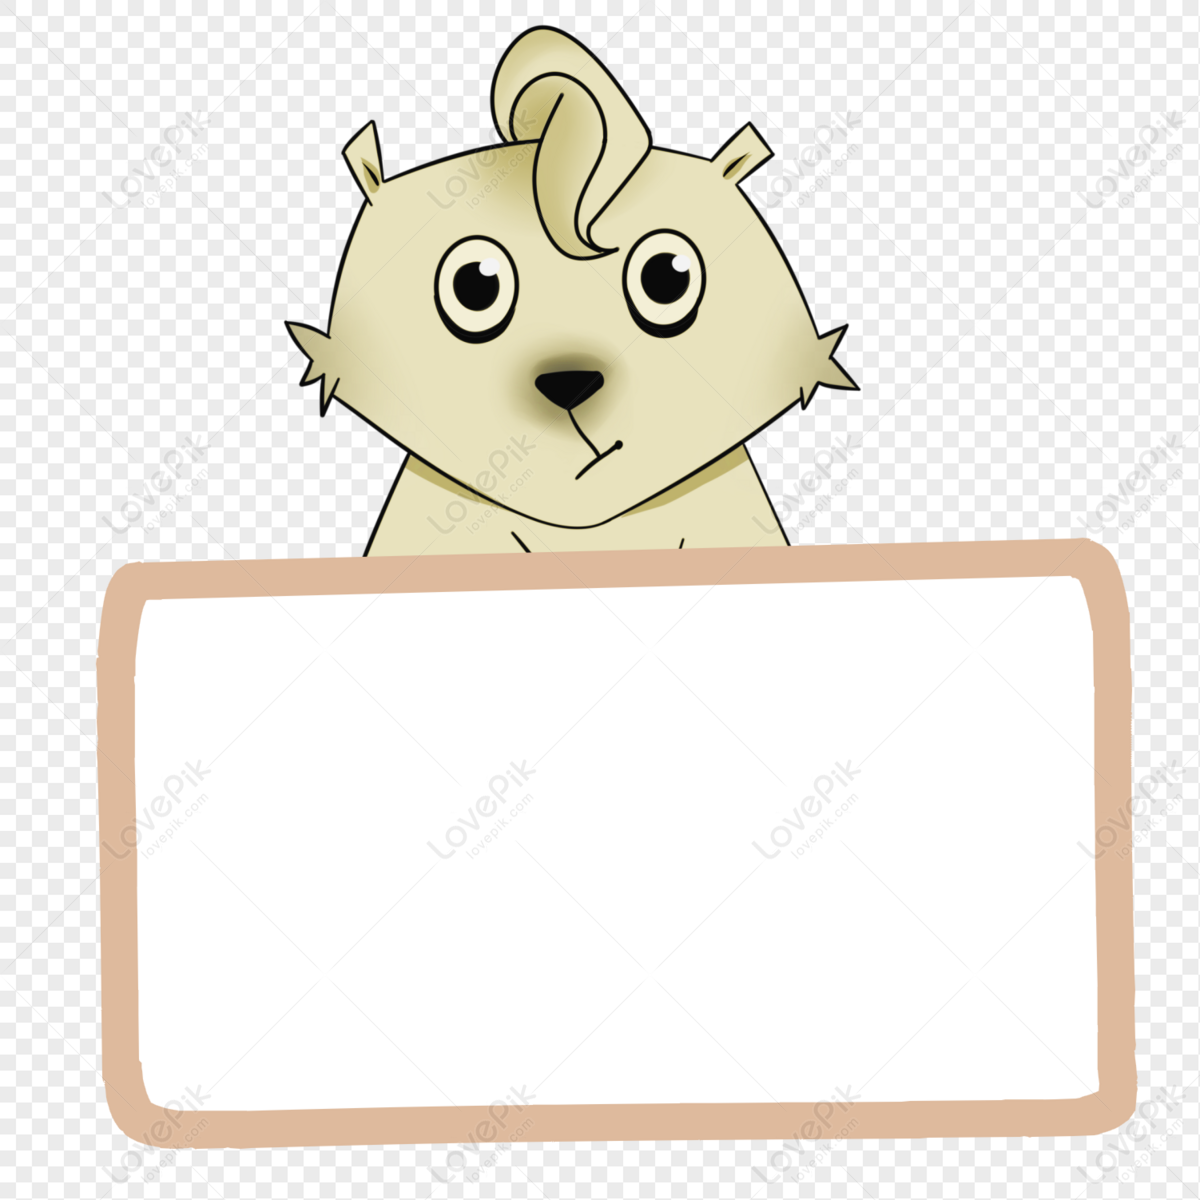 Brown Bear Animal Cute Small Border PNG White Transparent And Clipart Image  For Free Download - Lovepik | 401415512